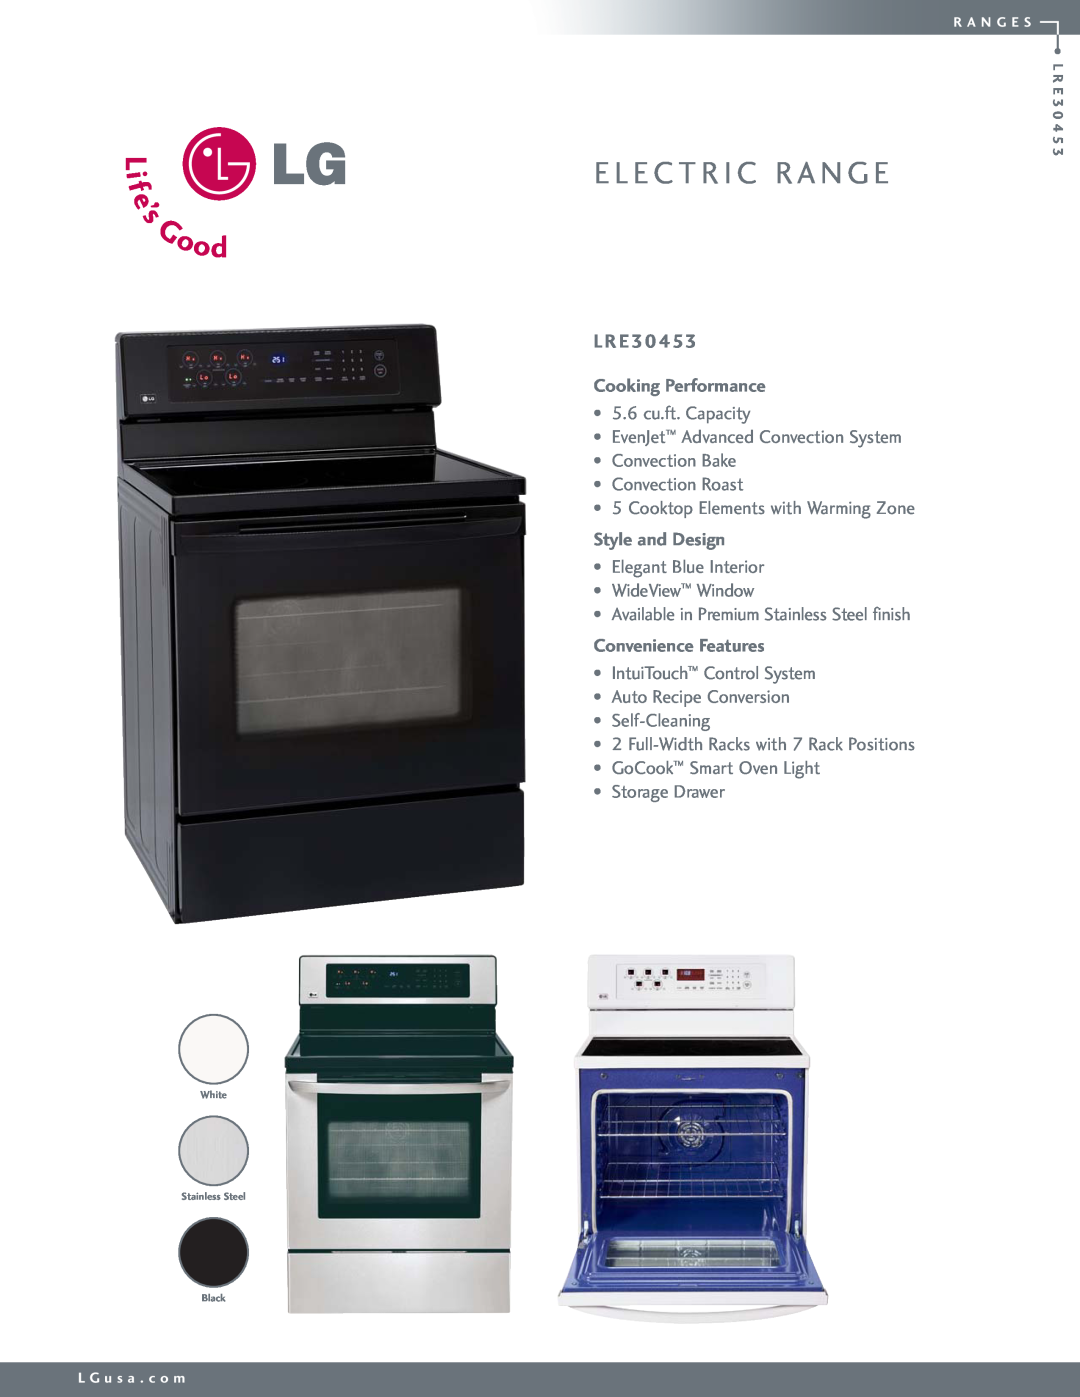 LG Electronics CK-3001-1 manual L R E, E L E C T R I C R A N G E, Cooking Performance, Style and Design 